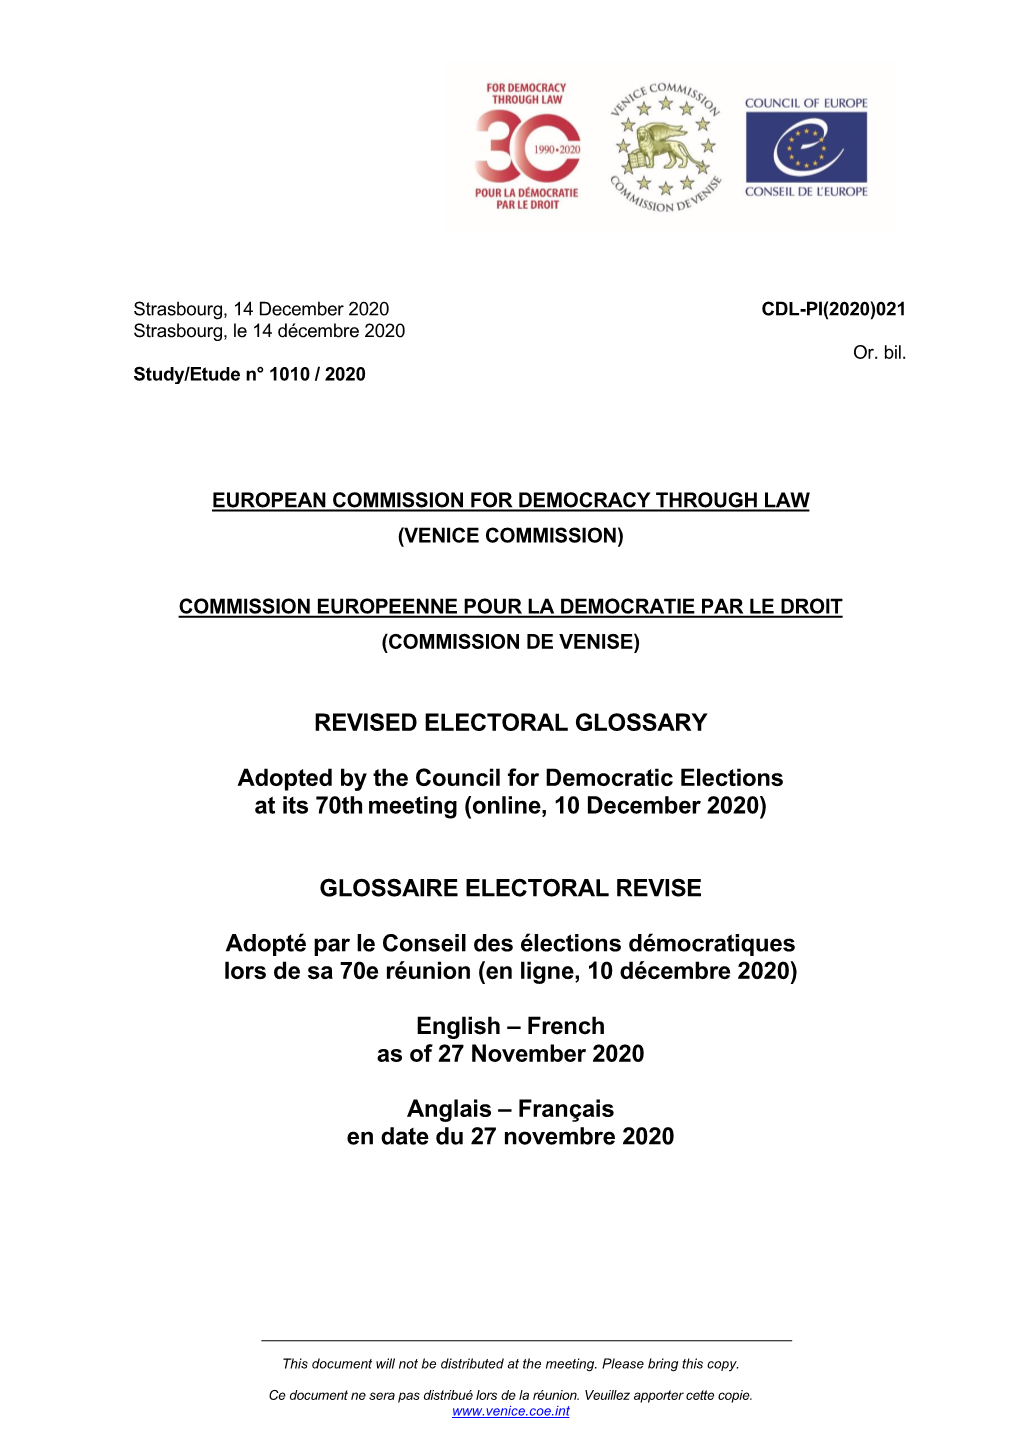 REVISED ELECTORAL GLOSSARY Adopted by the Council for Democratic Elections at Its 70Thmeeting (Online, 10 December 2020) GLOSSAI